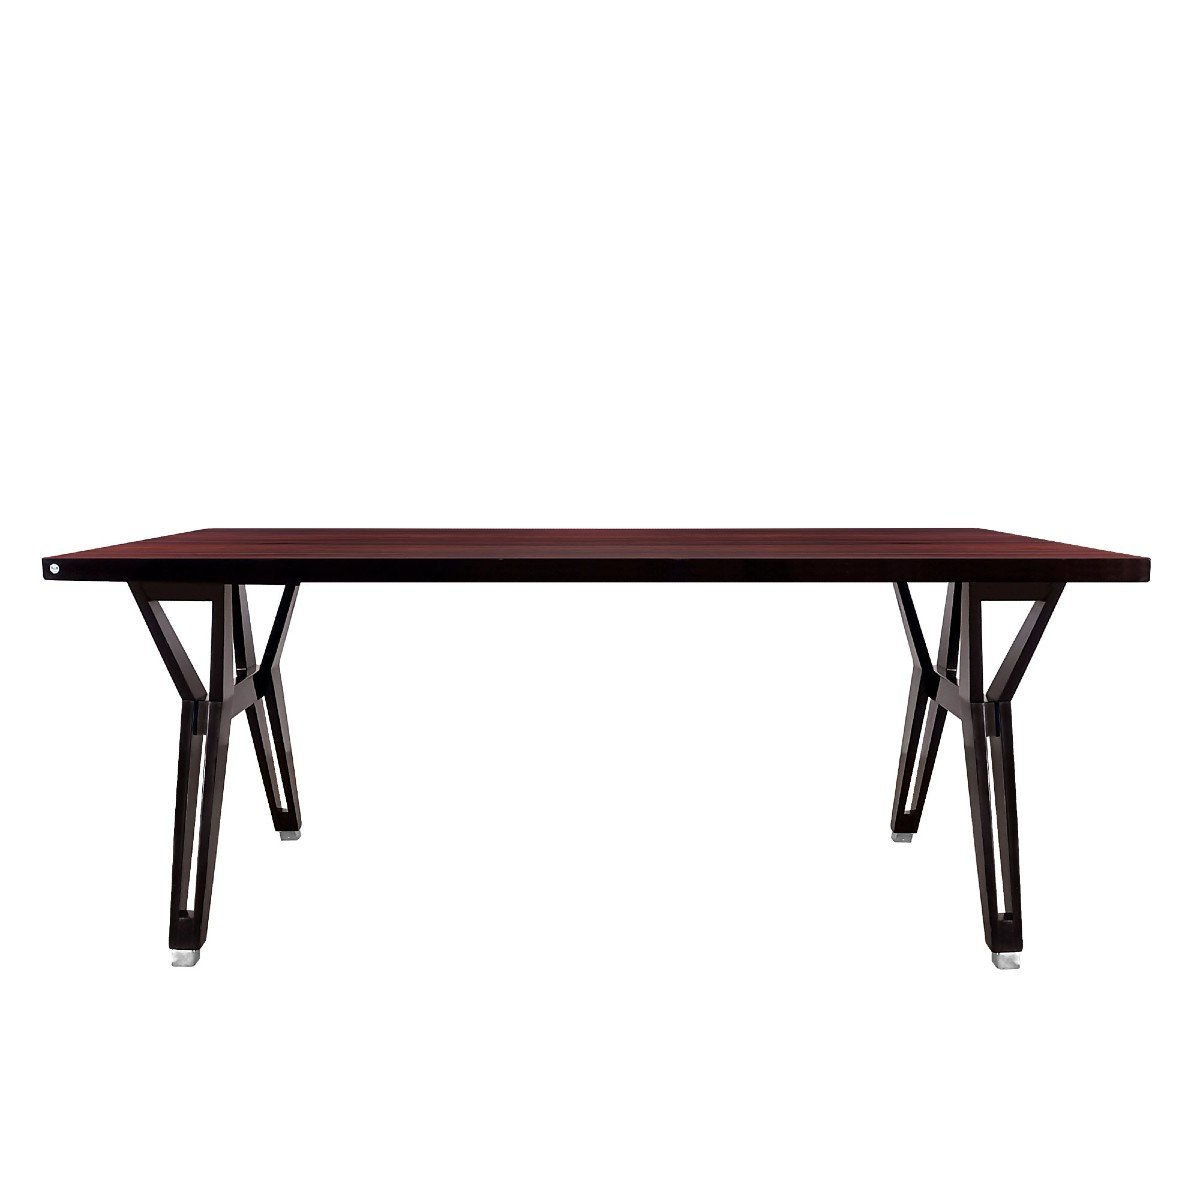 Table Or Desk In Beech And Rosewood By Ico Parisi And Ennio Fazioli - Italy 1958-photo-2